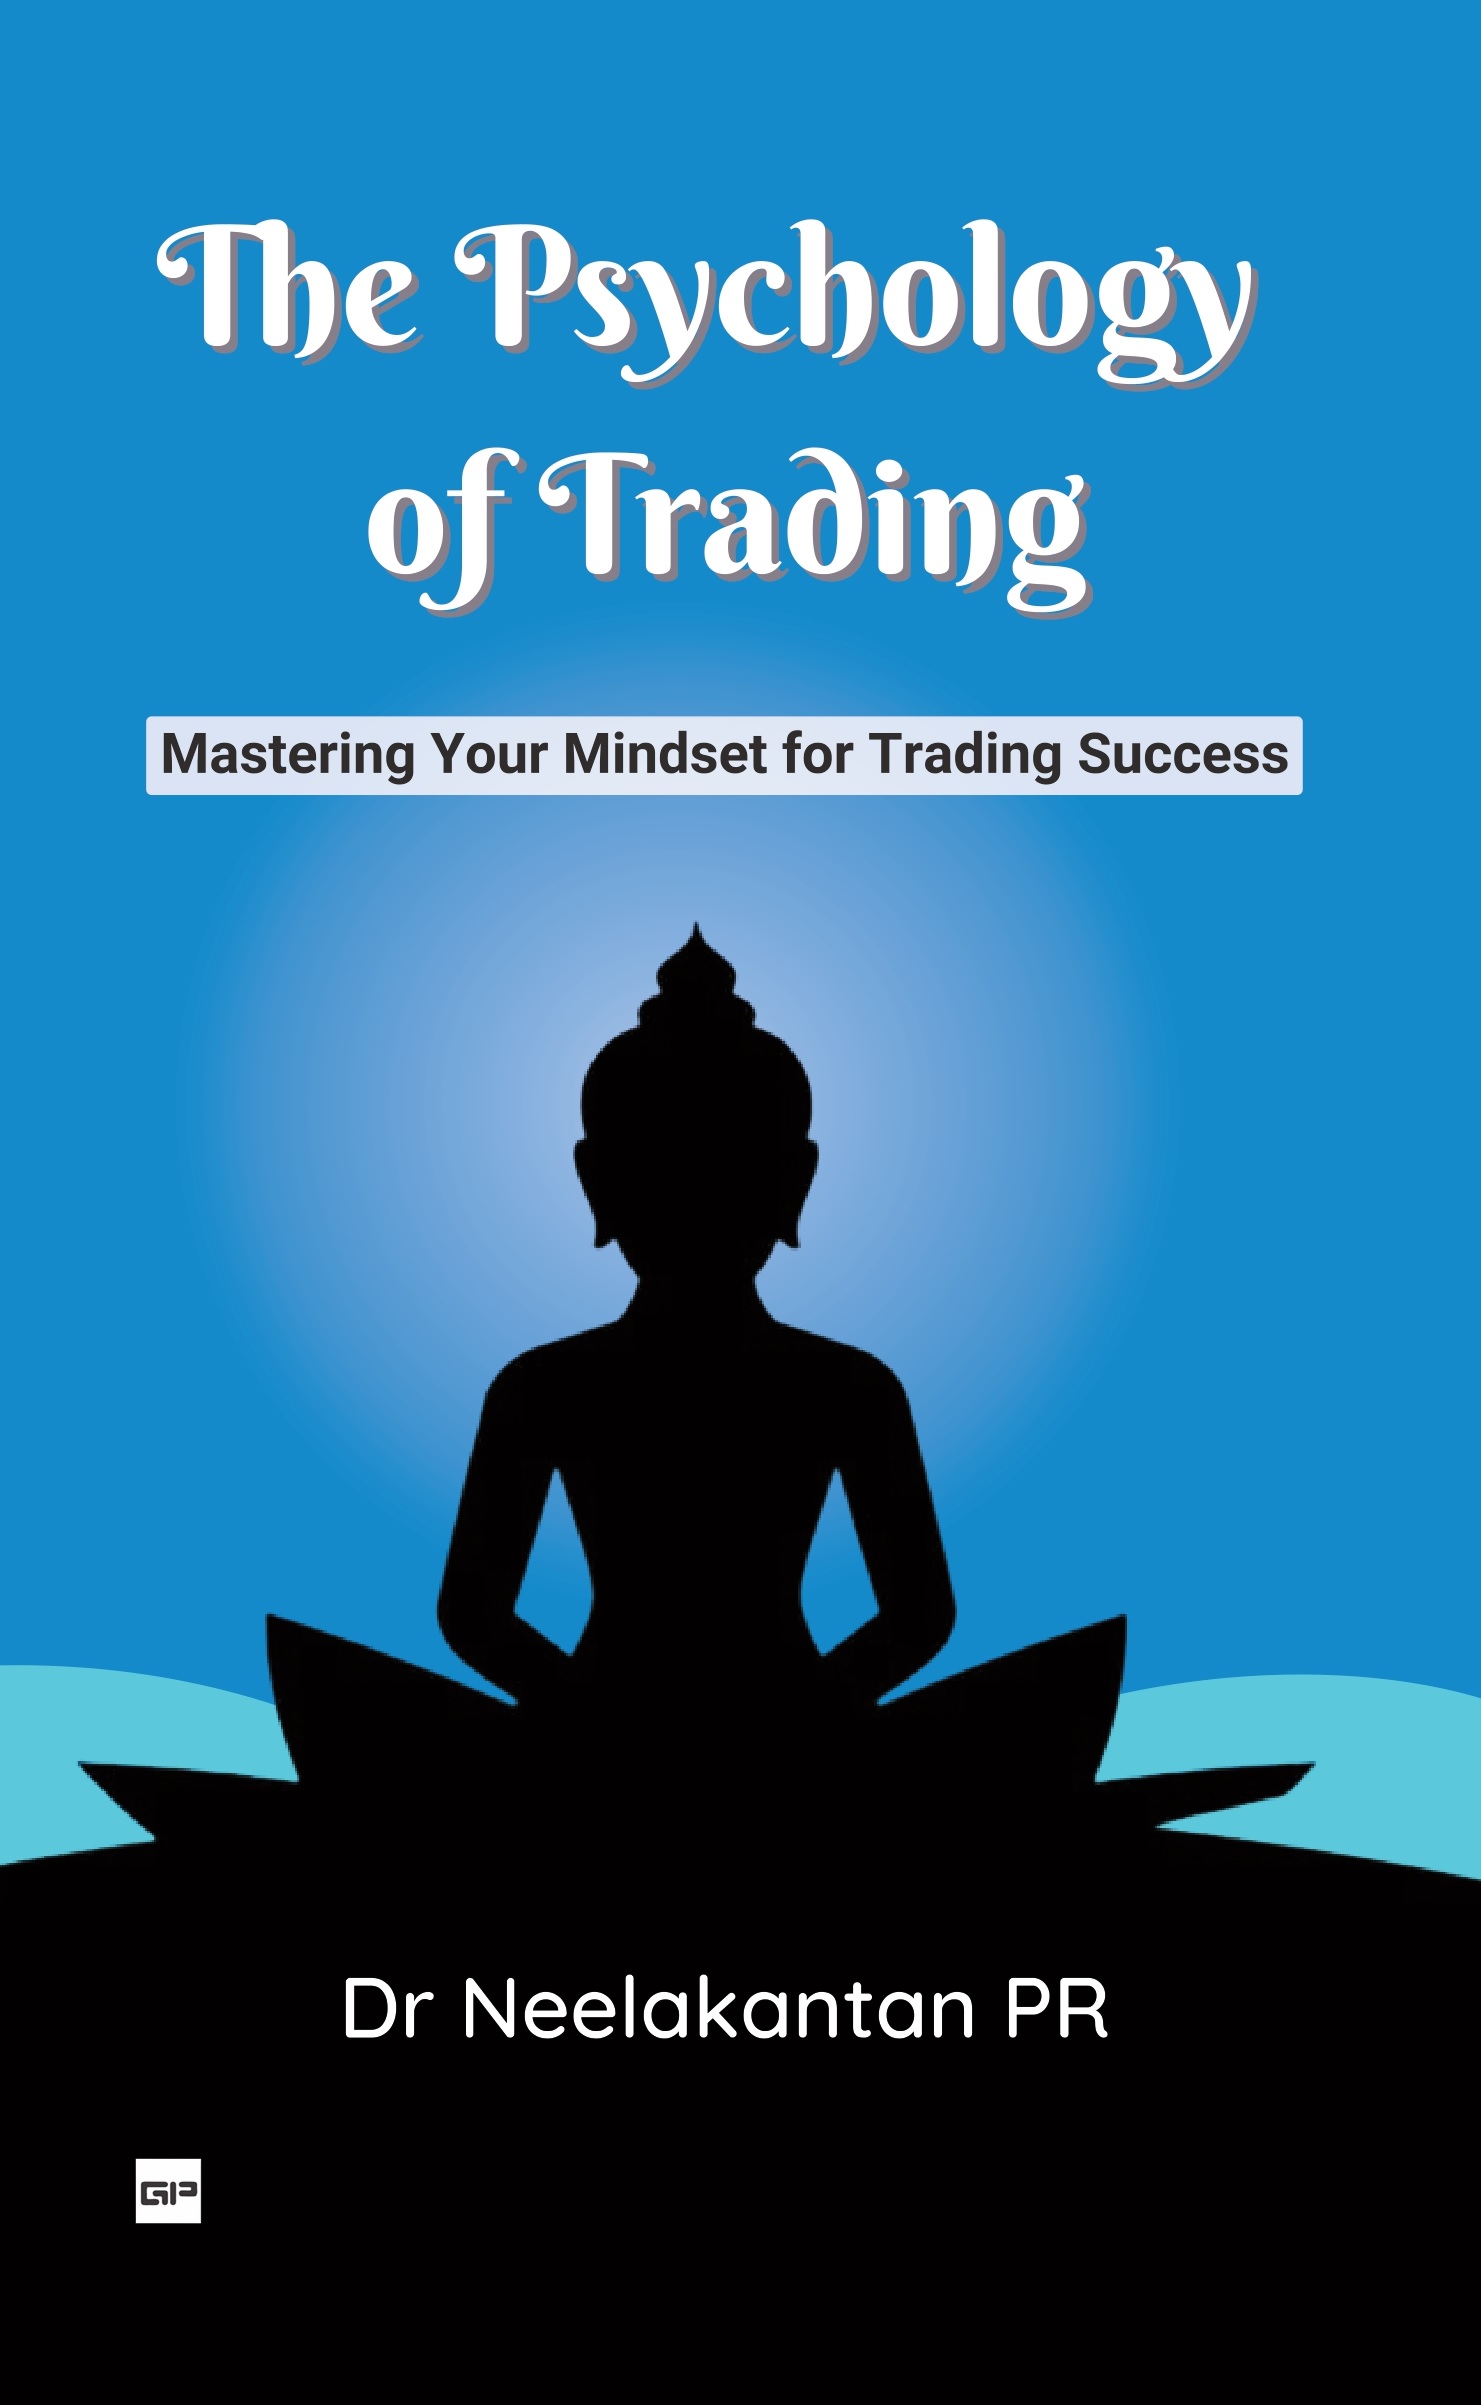 The Psychology of Trading: Mastering Your Mindset for Trading Success